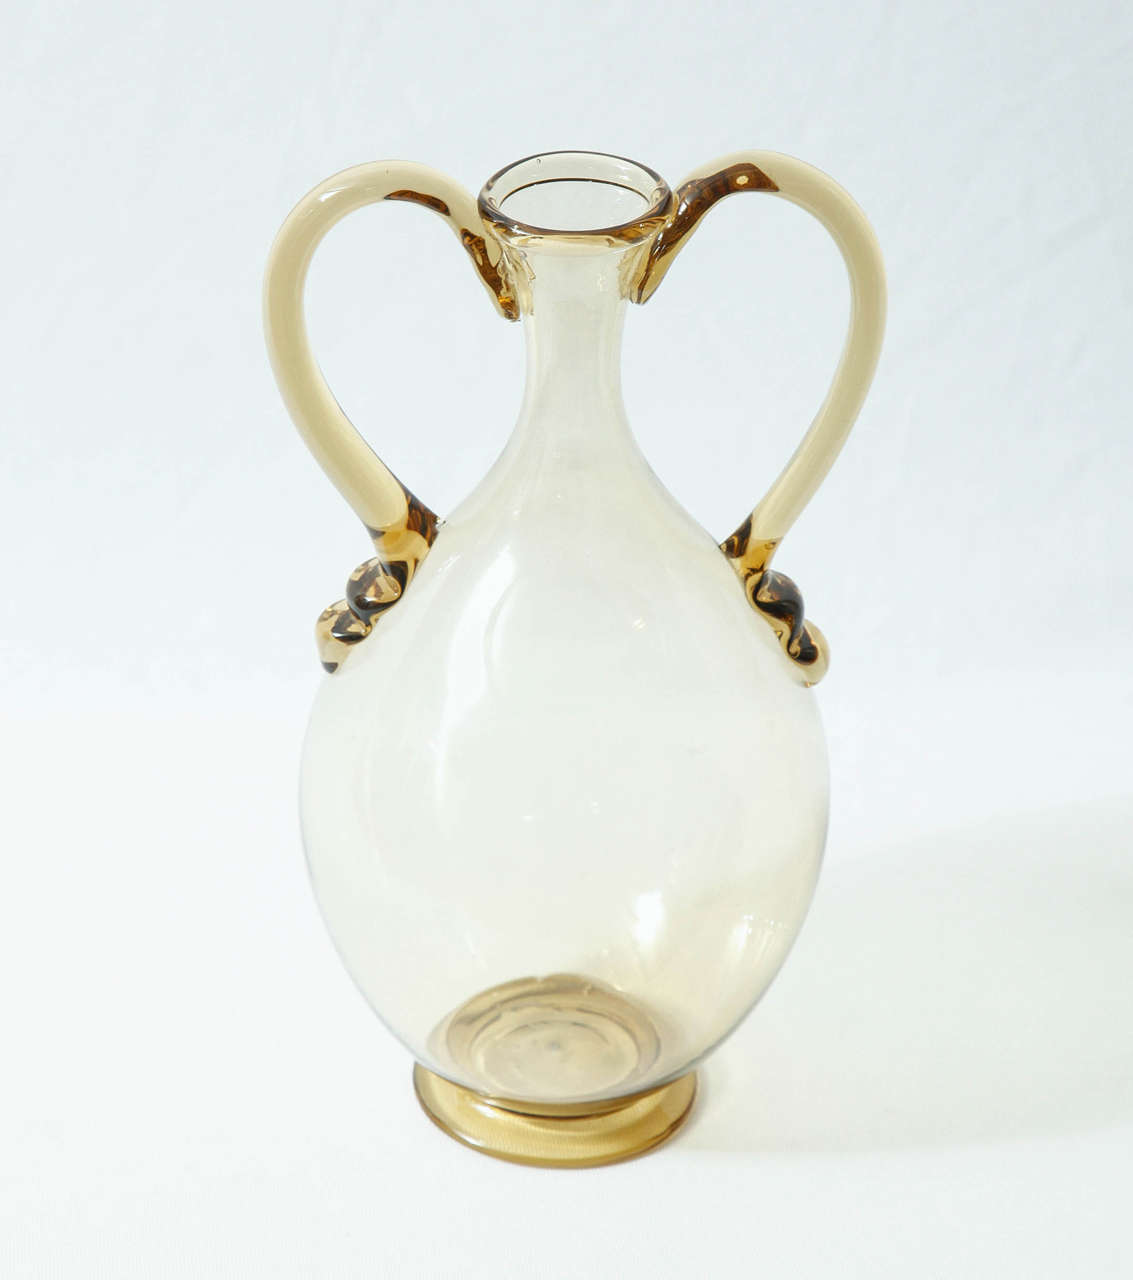 'Soffiato' vase in light yellow blown glass with applied details designed by the Italian artist Vittorio Zecchin (1878-1947) and executed by Venini, glassworks in Murano, Italy.
Venini acid marks (see last image).